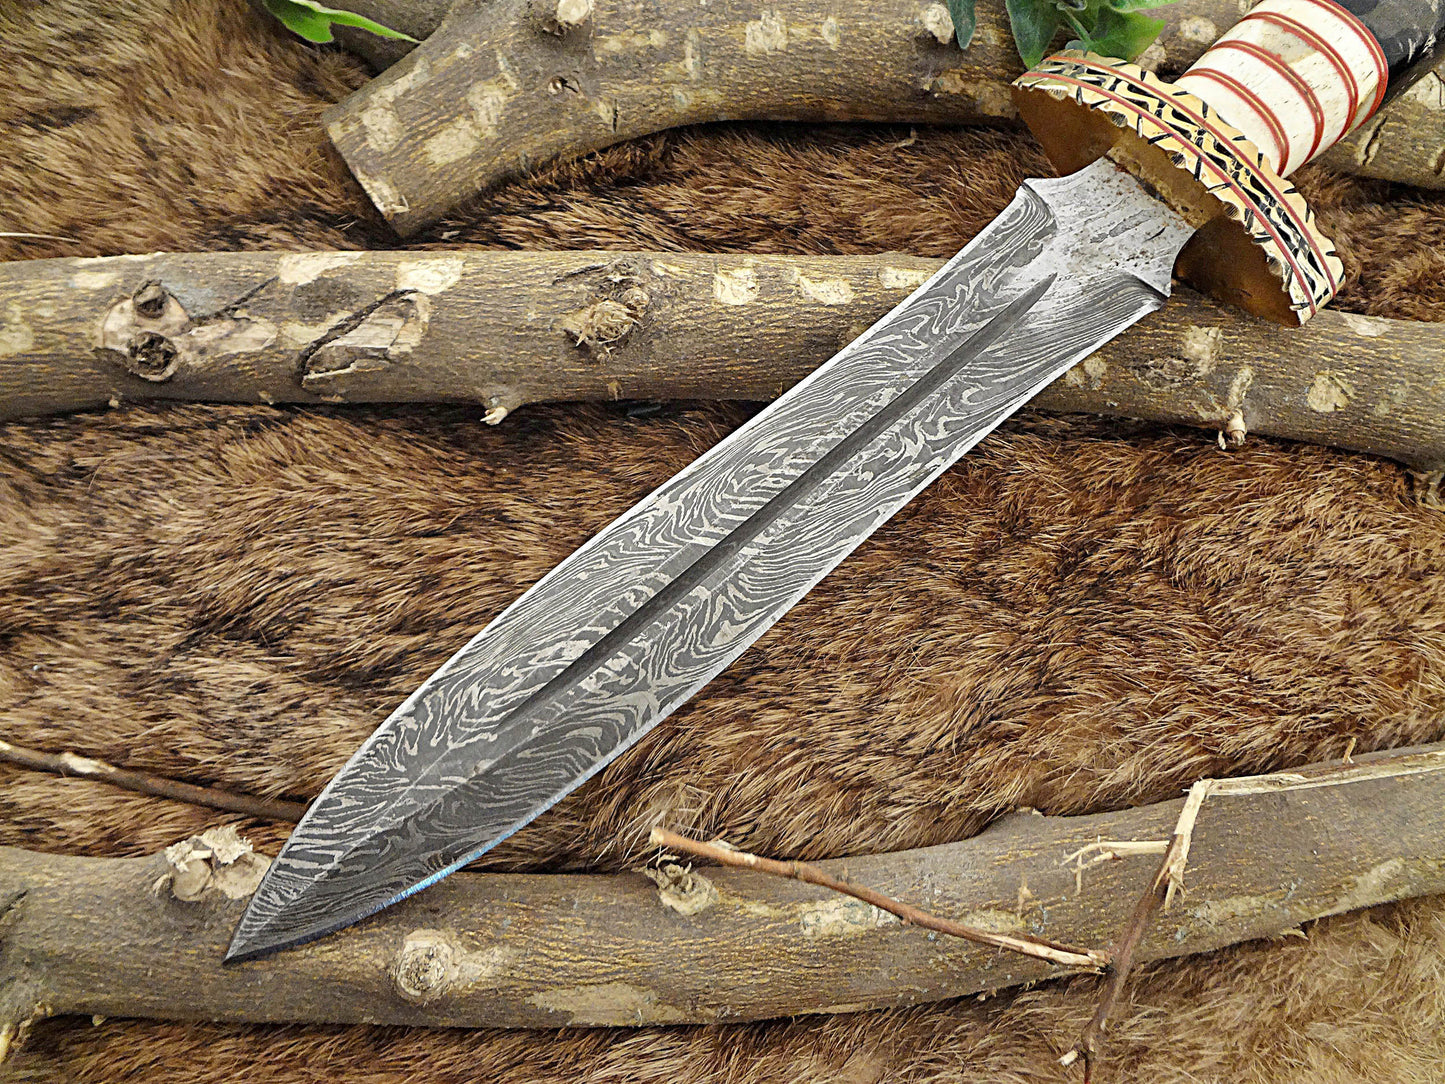 14.5" Long Damascus steel Dagger knife hand forged 8" dual edge,exotic scale crafted with engraved brass finger guard camel bone, Sheath